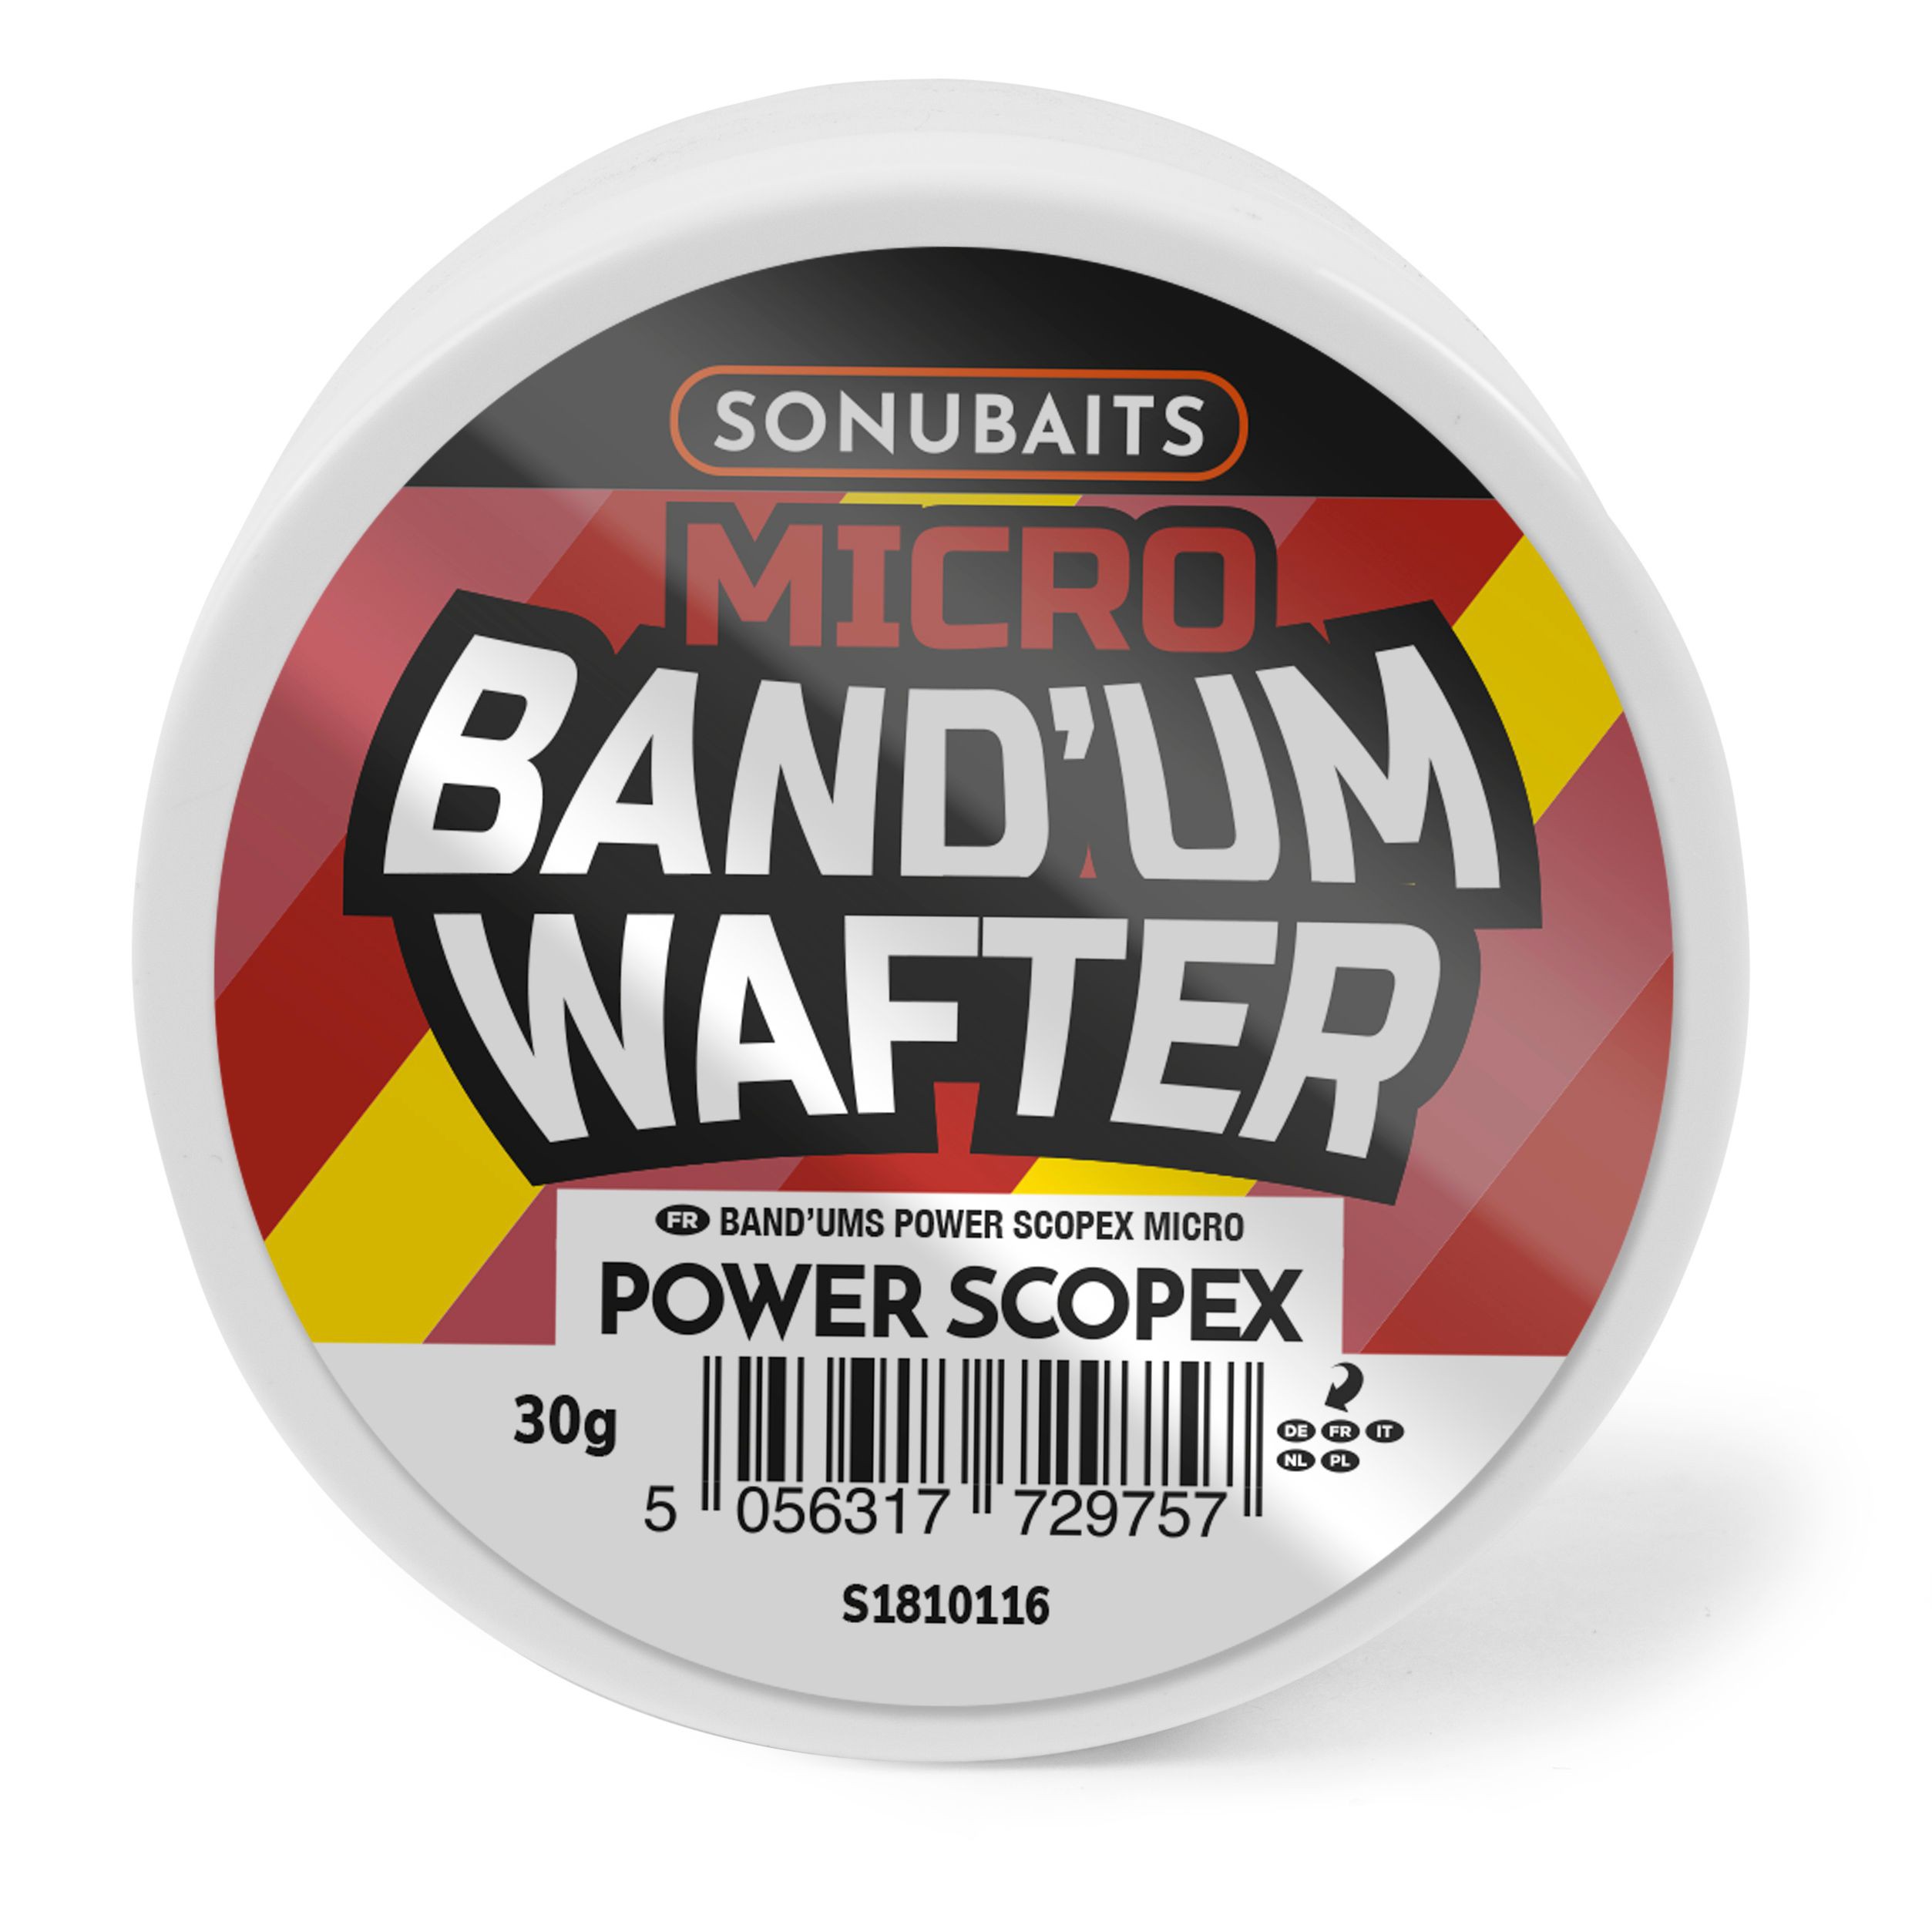 Sonubaits Micro Band' Um Wafter Power Scopex